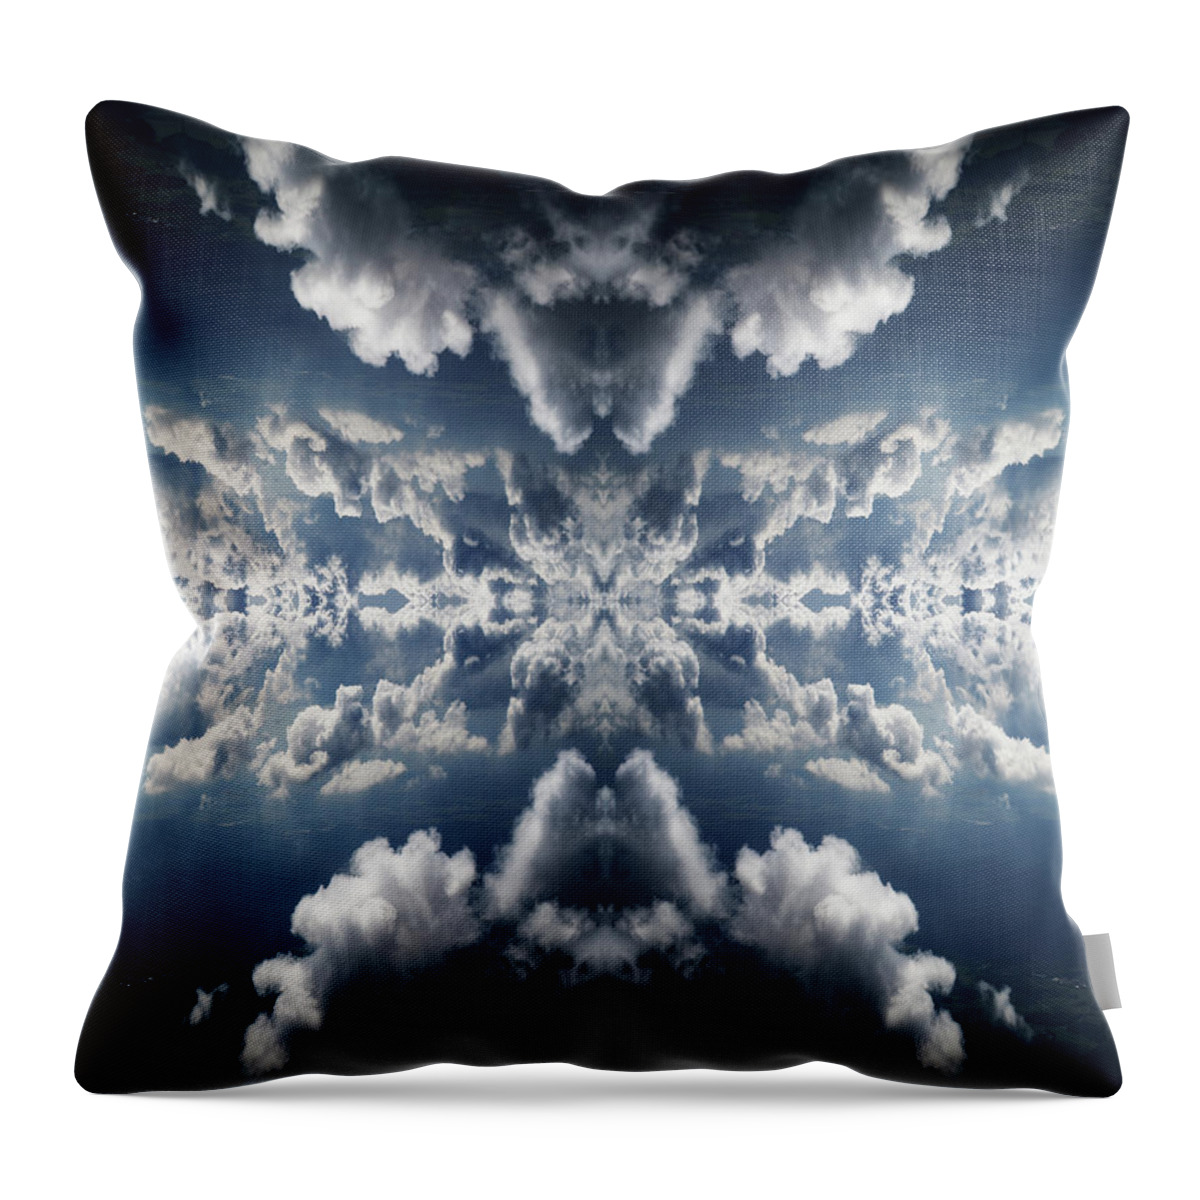 Berlin Throw Pillow featuring the photograph Surreal Rorschach Collage Of Dramatic #3 by Silvia Otte